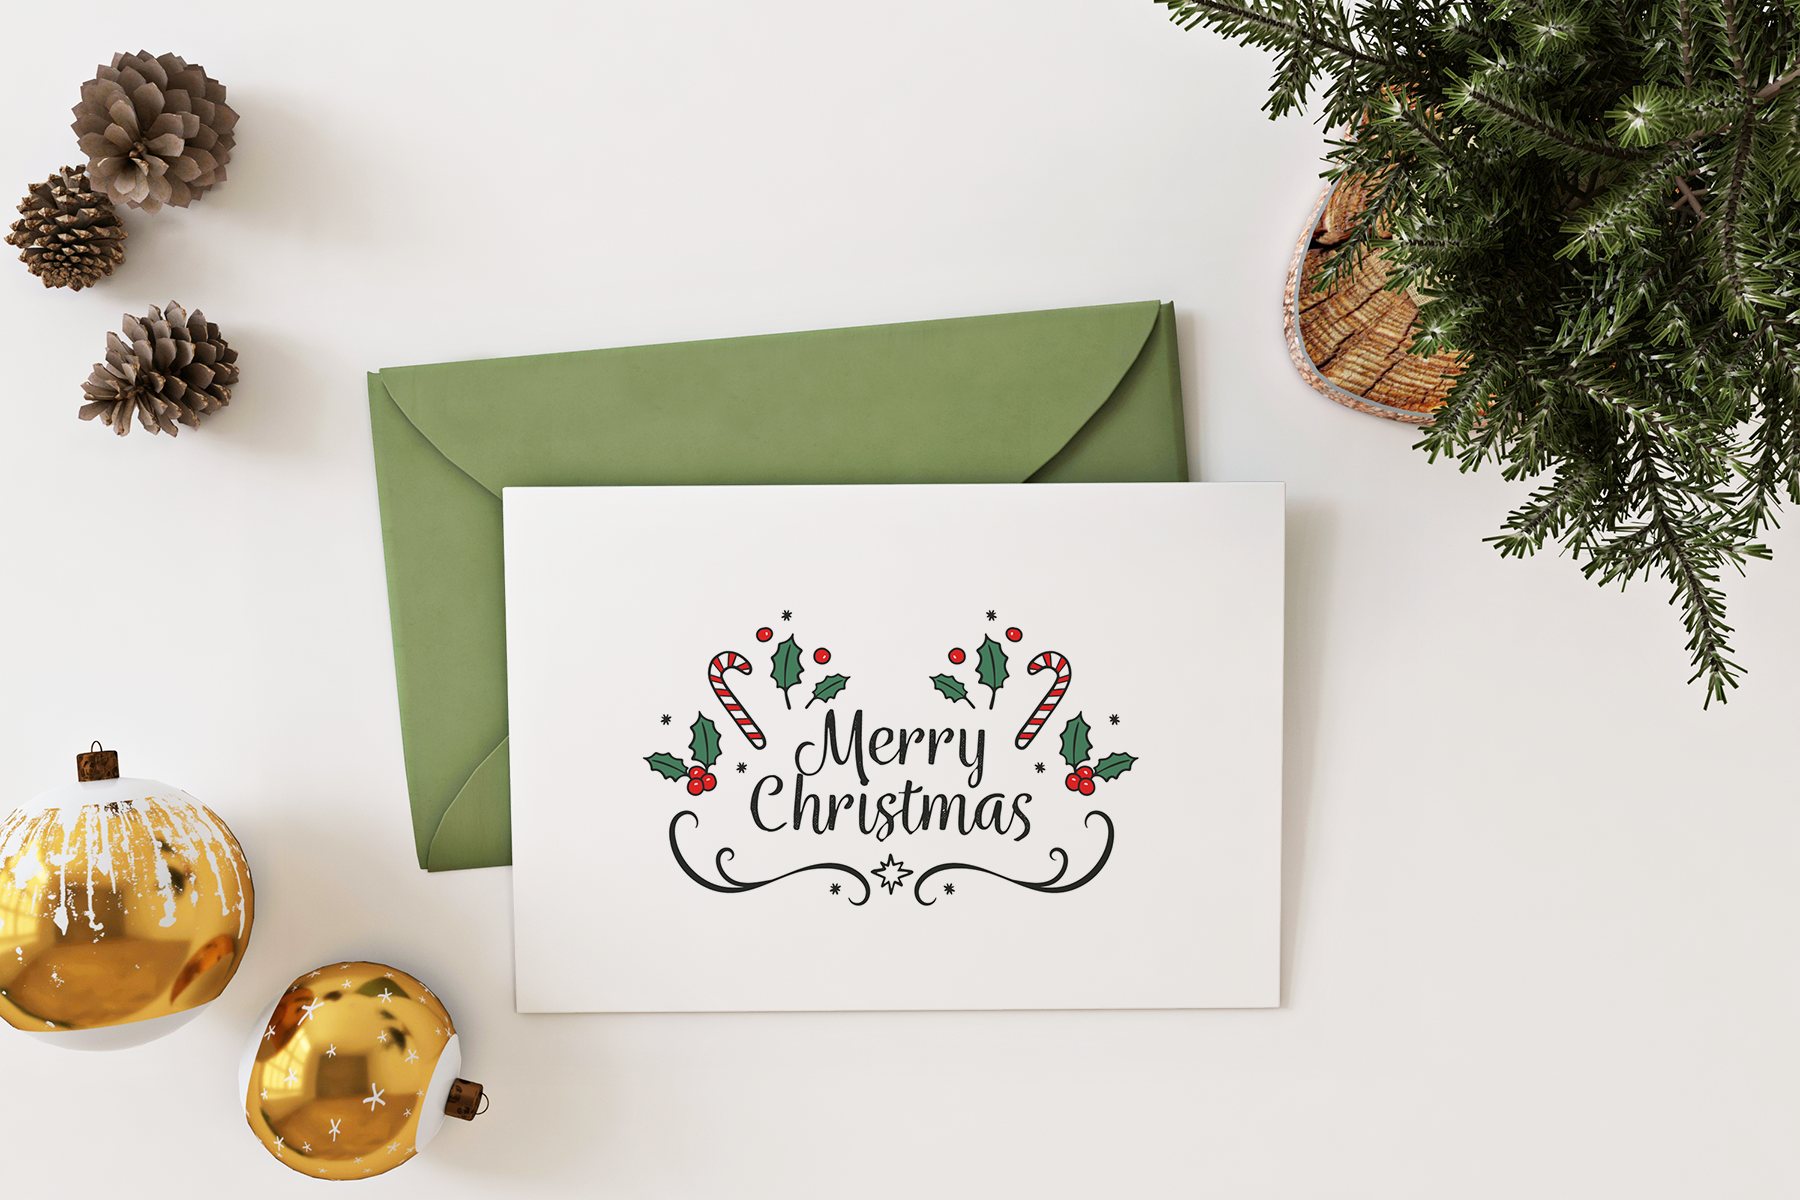 Free Christmas Card with Envelope Mockup